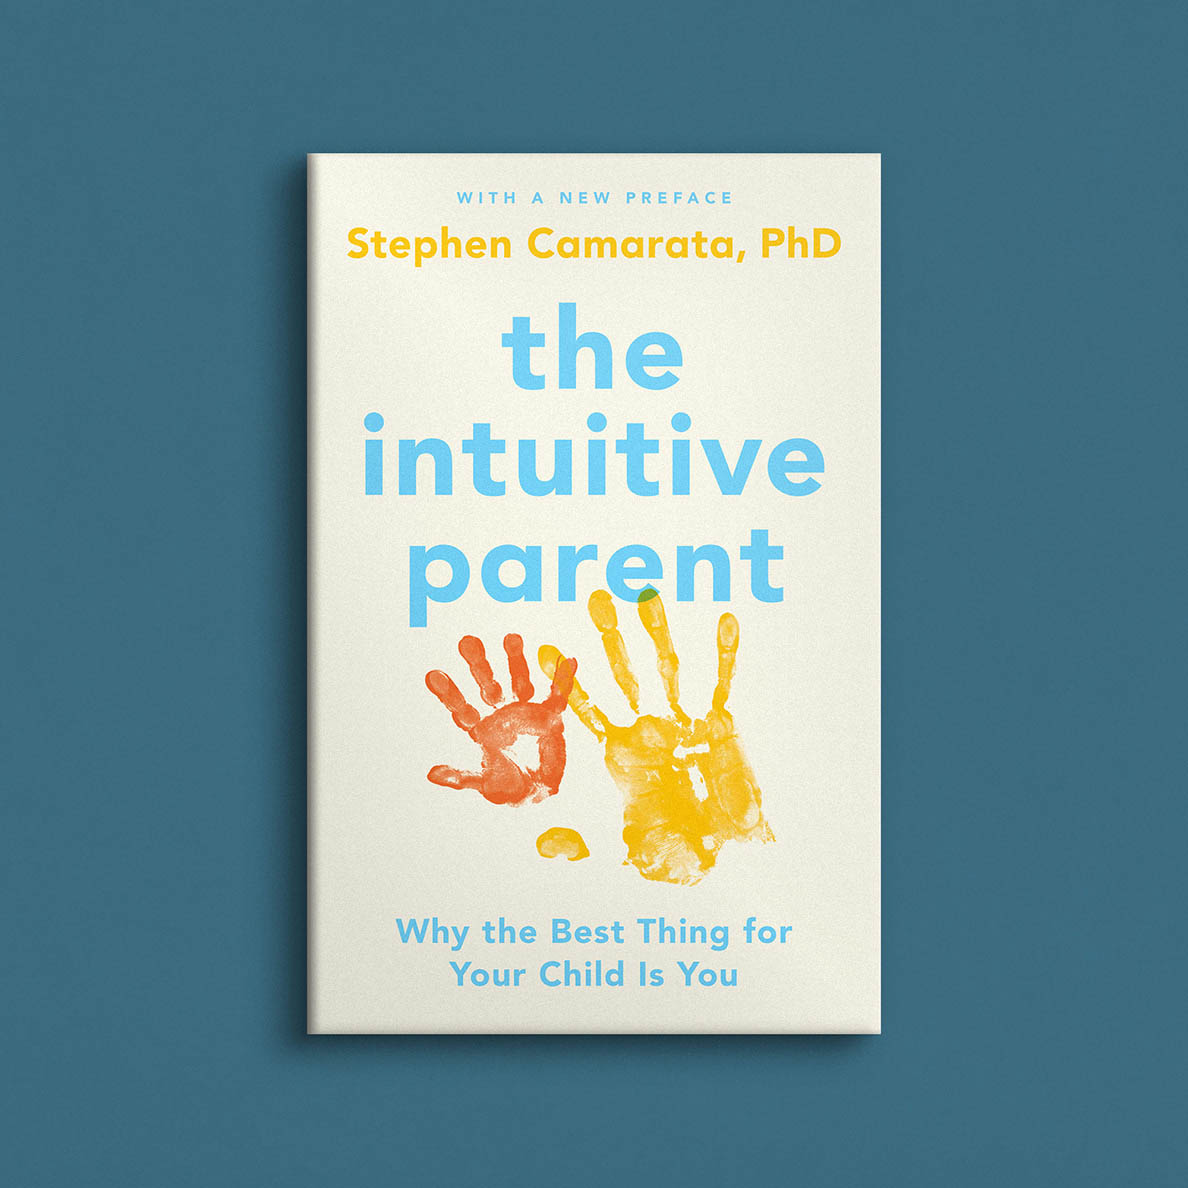 The Intuitive Parent book cover